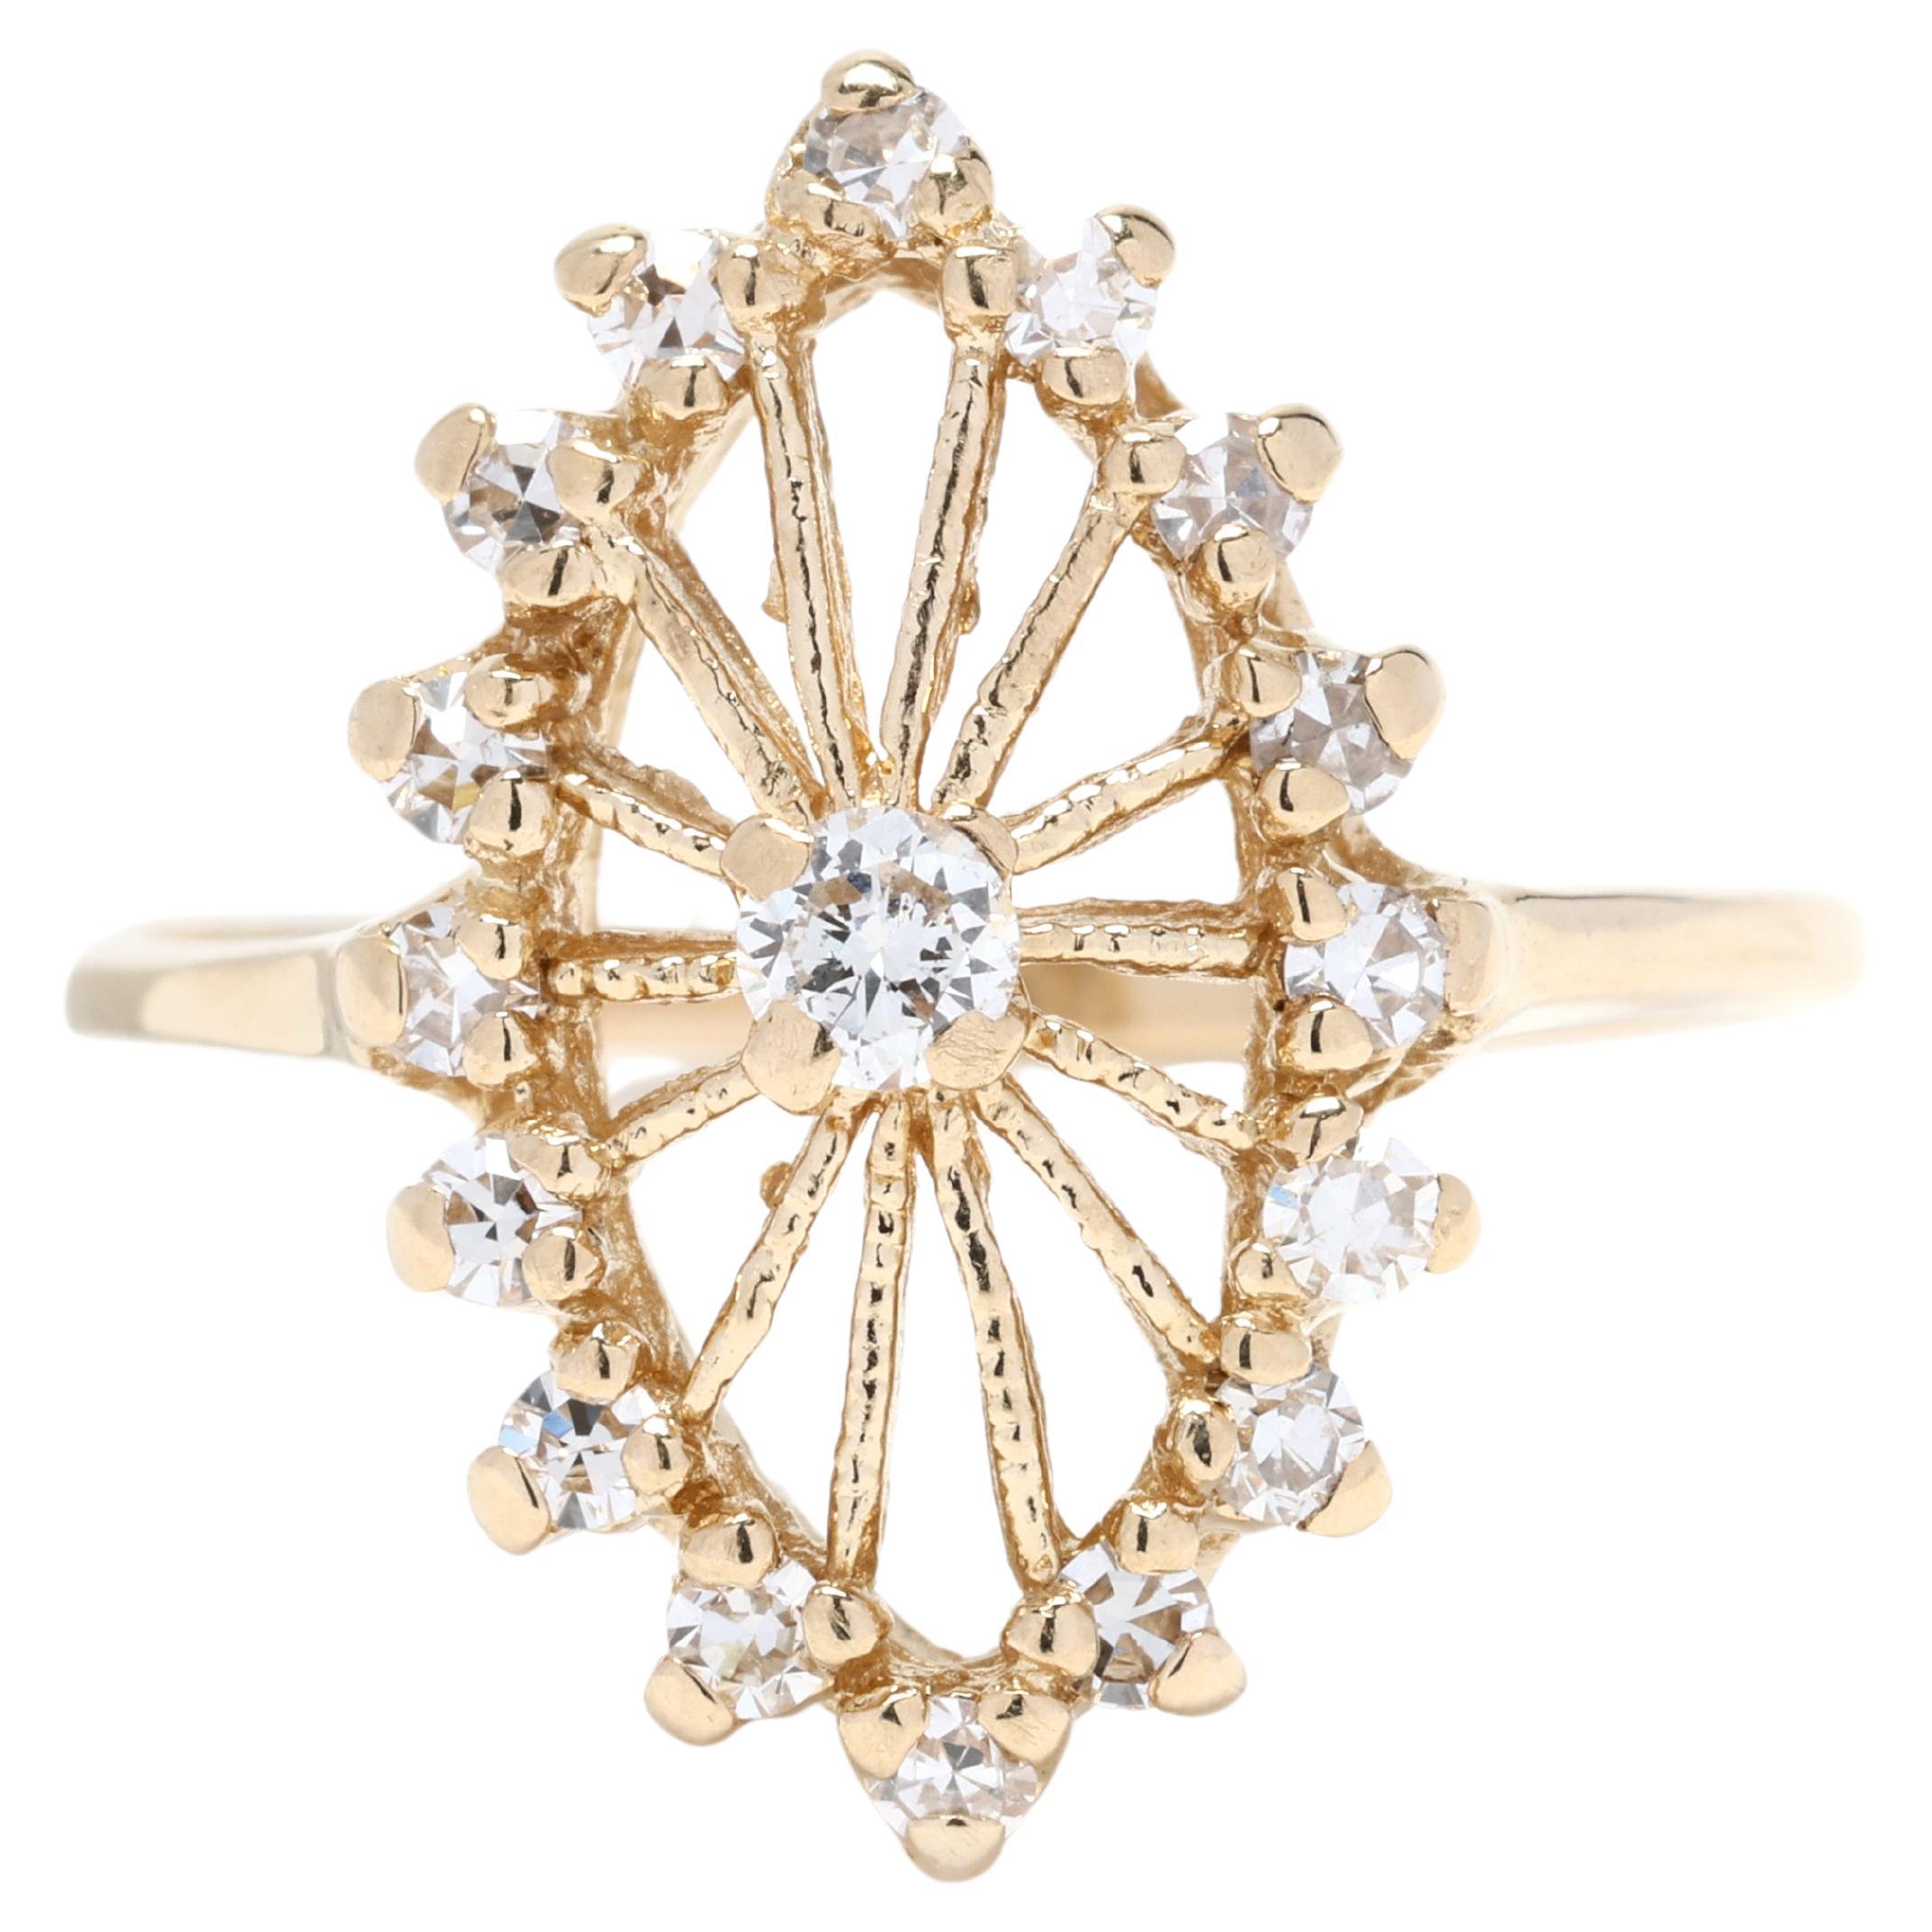 0.33ctw Diamond Navette Ring, 14K Yellow Gold, Ring Size 5.5, Diamond Cluster For Sale